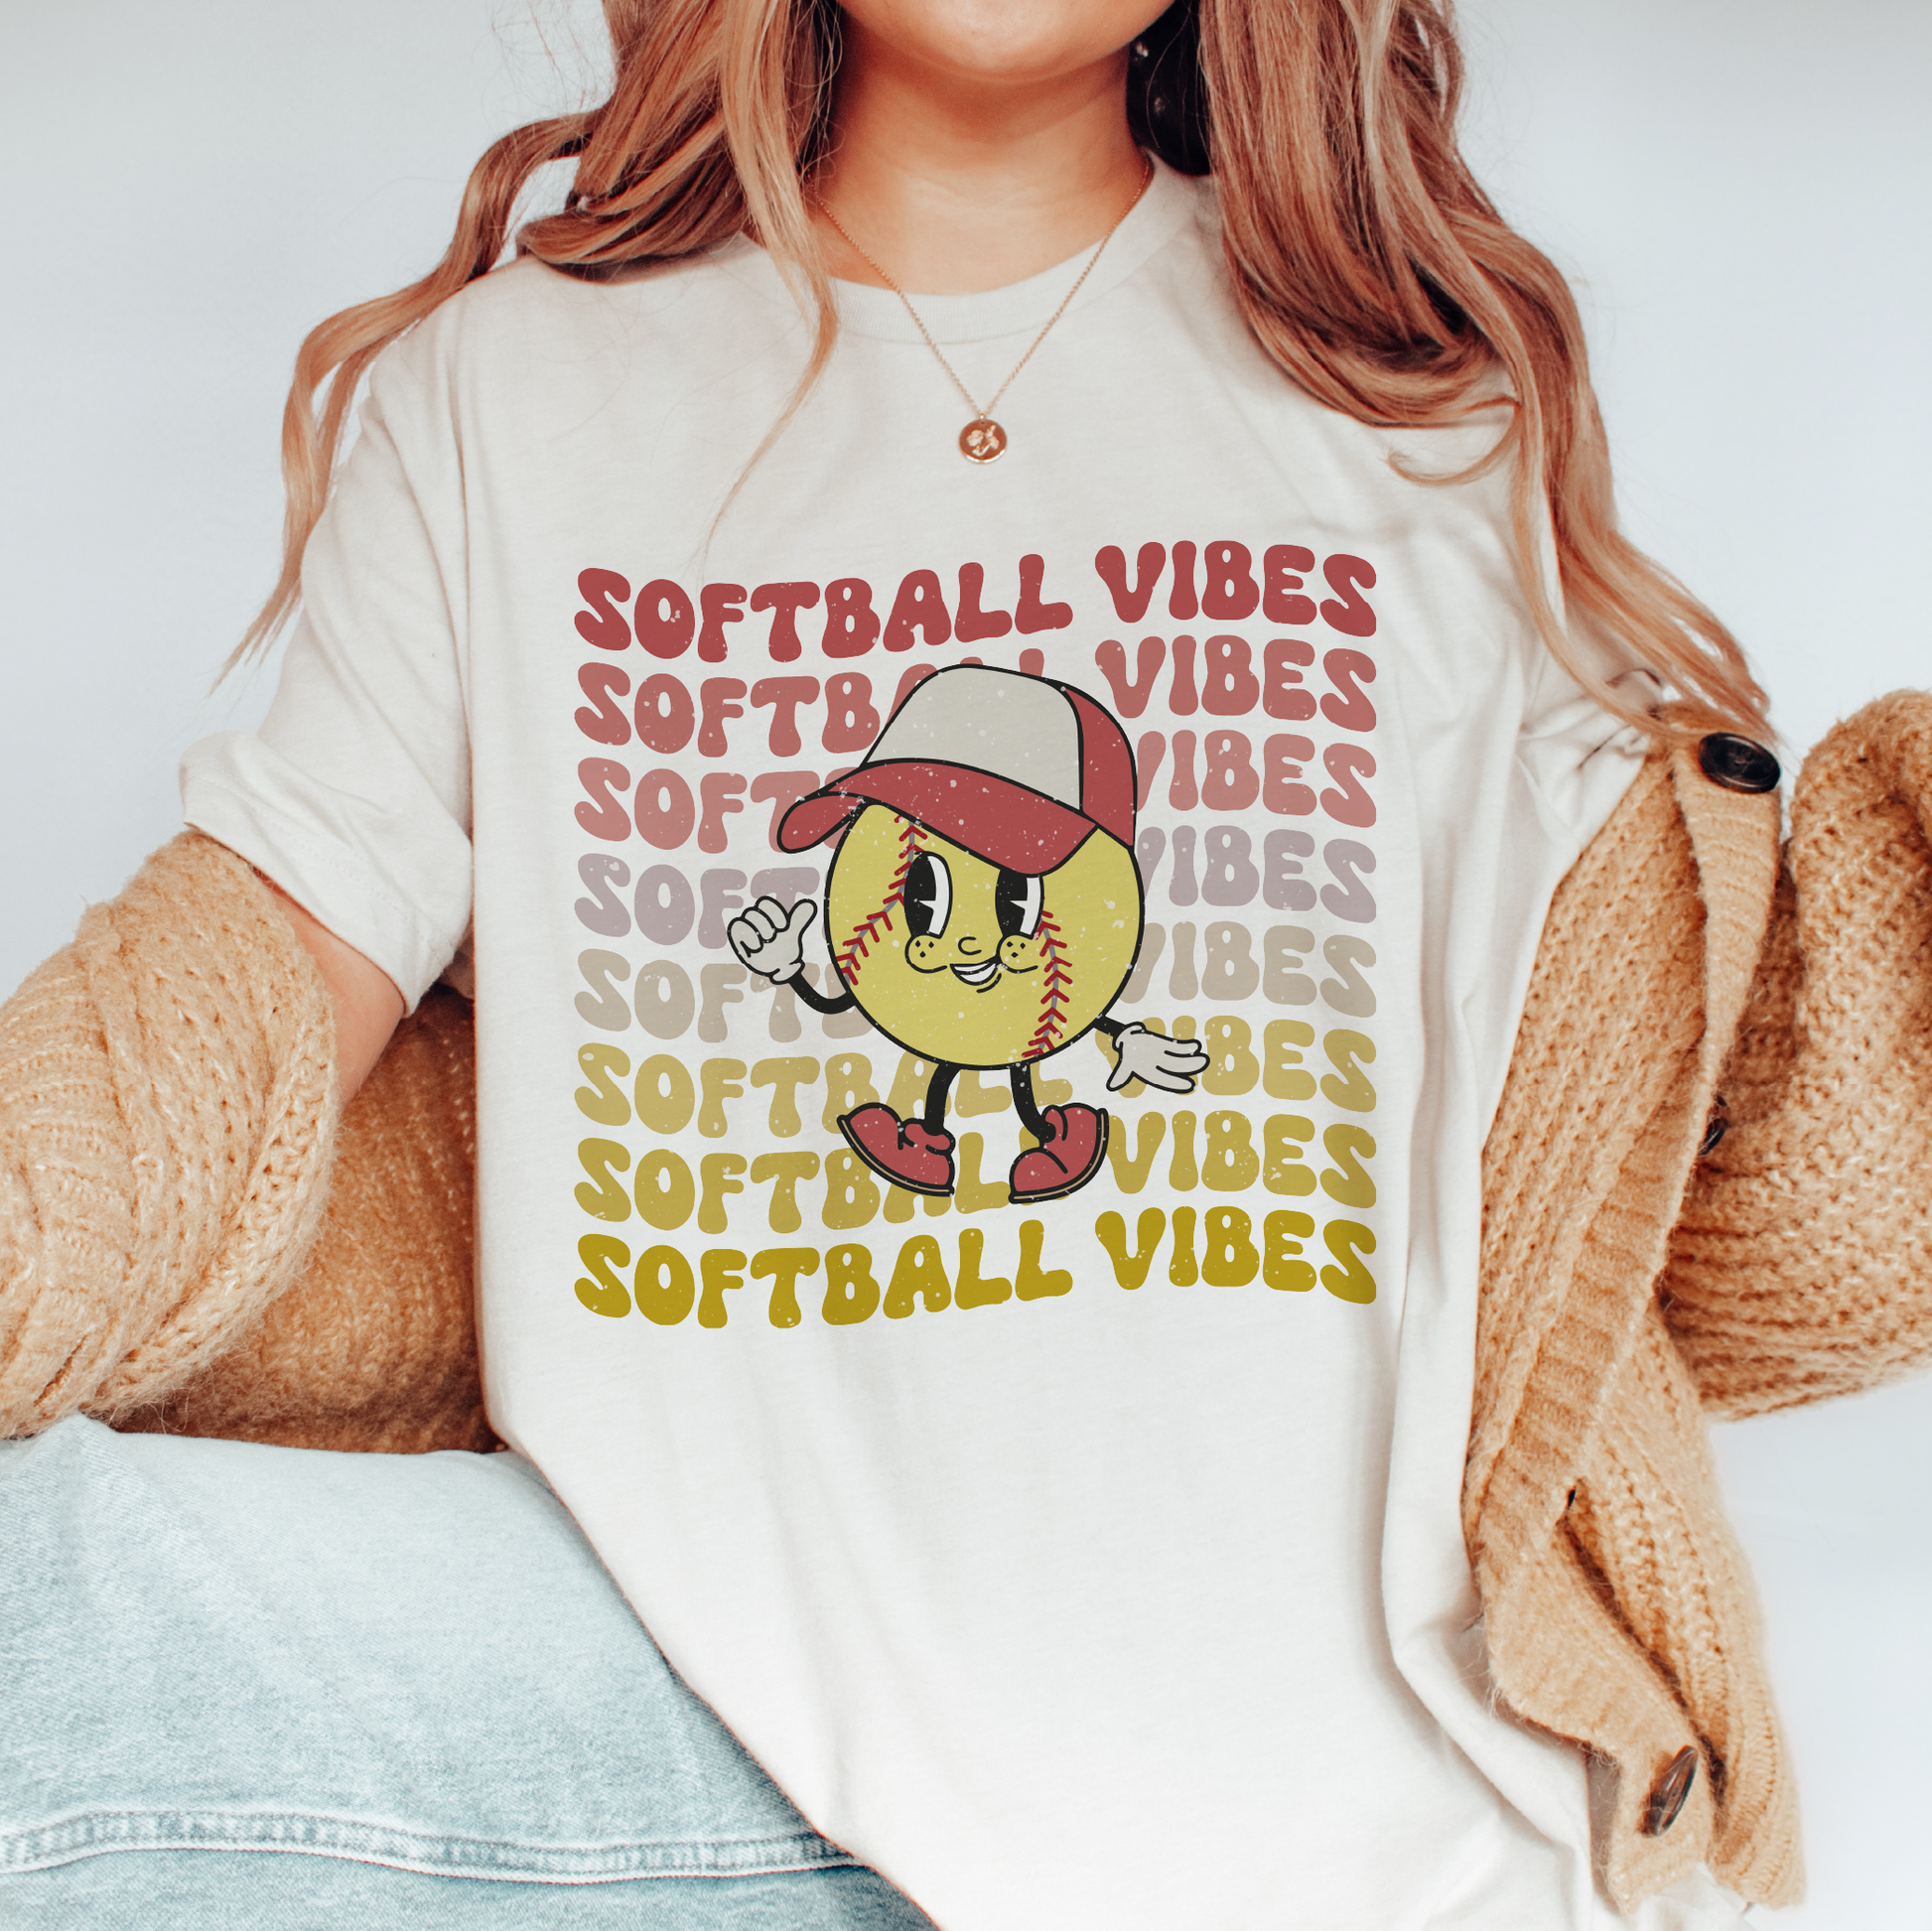 Softball Vibes Bubble PUFF – Texas Transfers and Designs